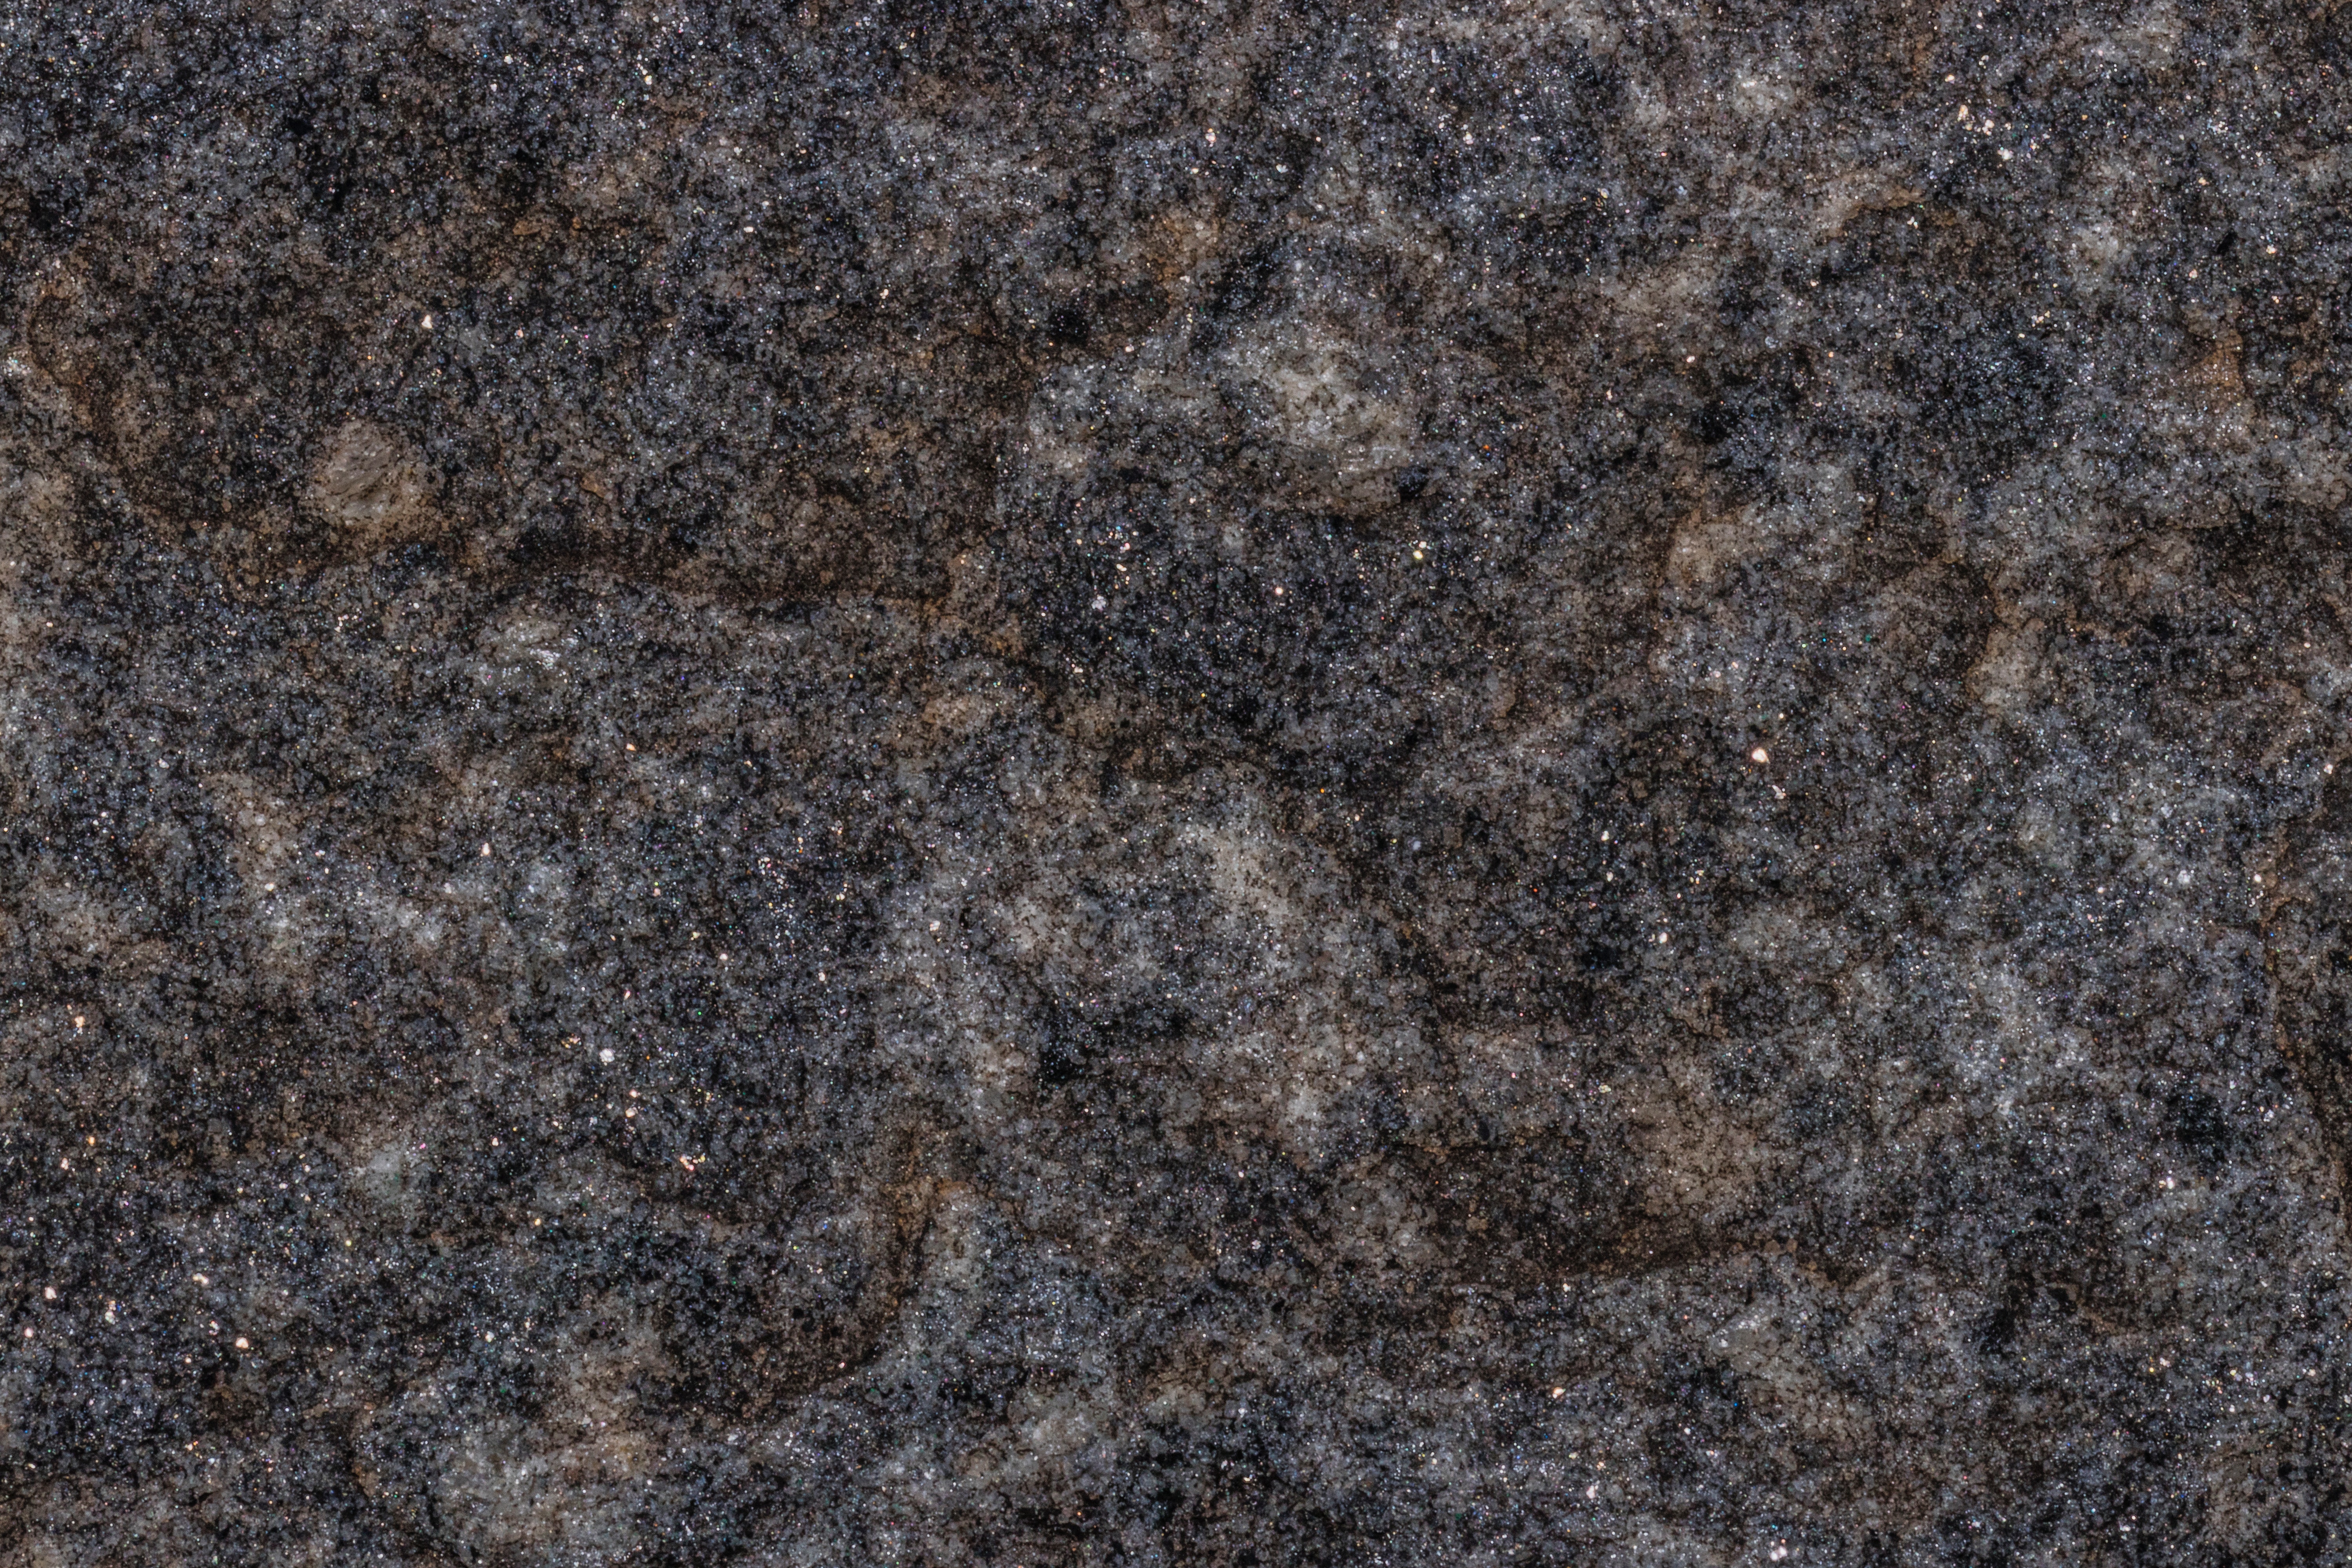 Free stock photo of rock texture close up